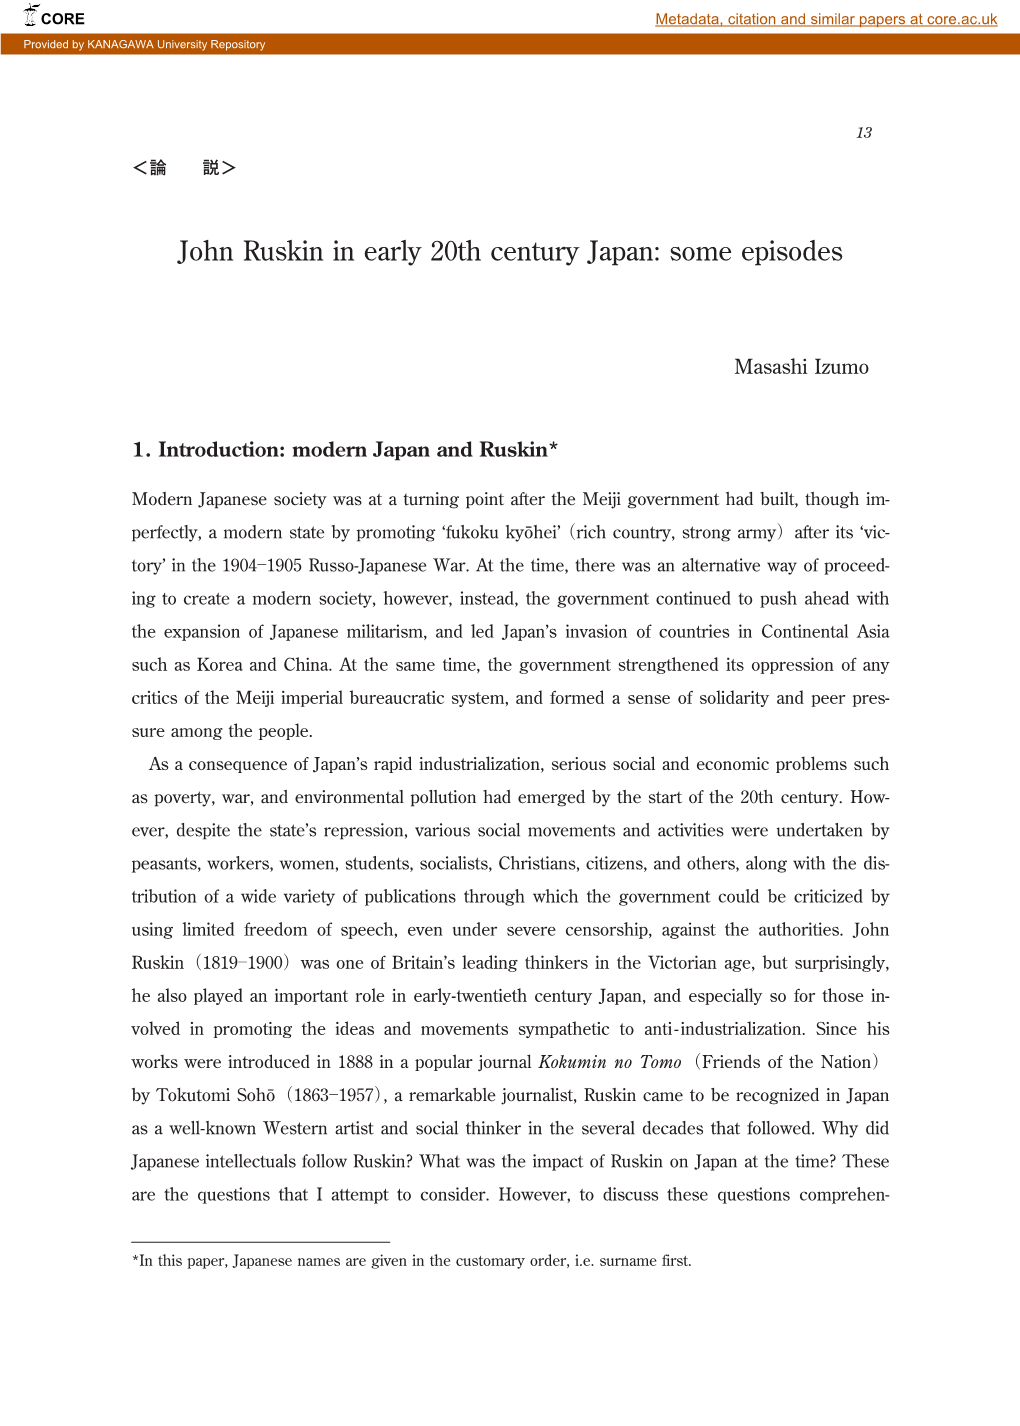 John Ruskin in Early 20Th Century Japan: Some Episodes